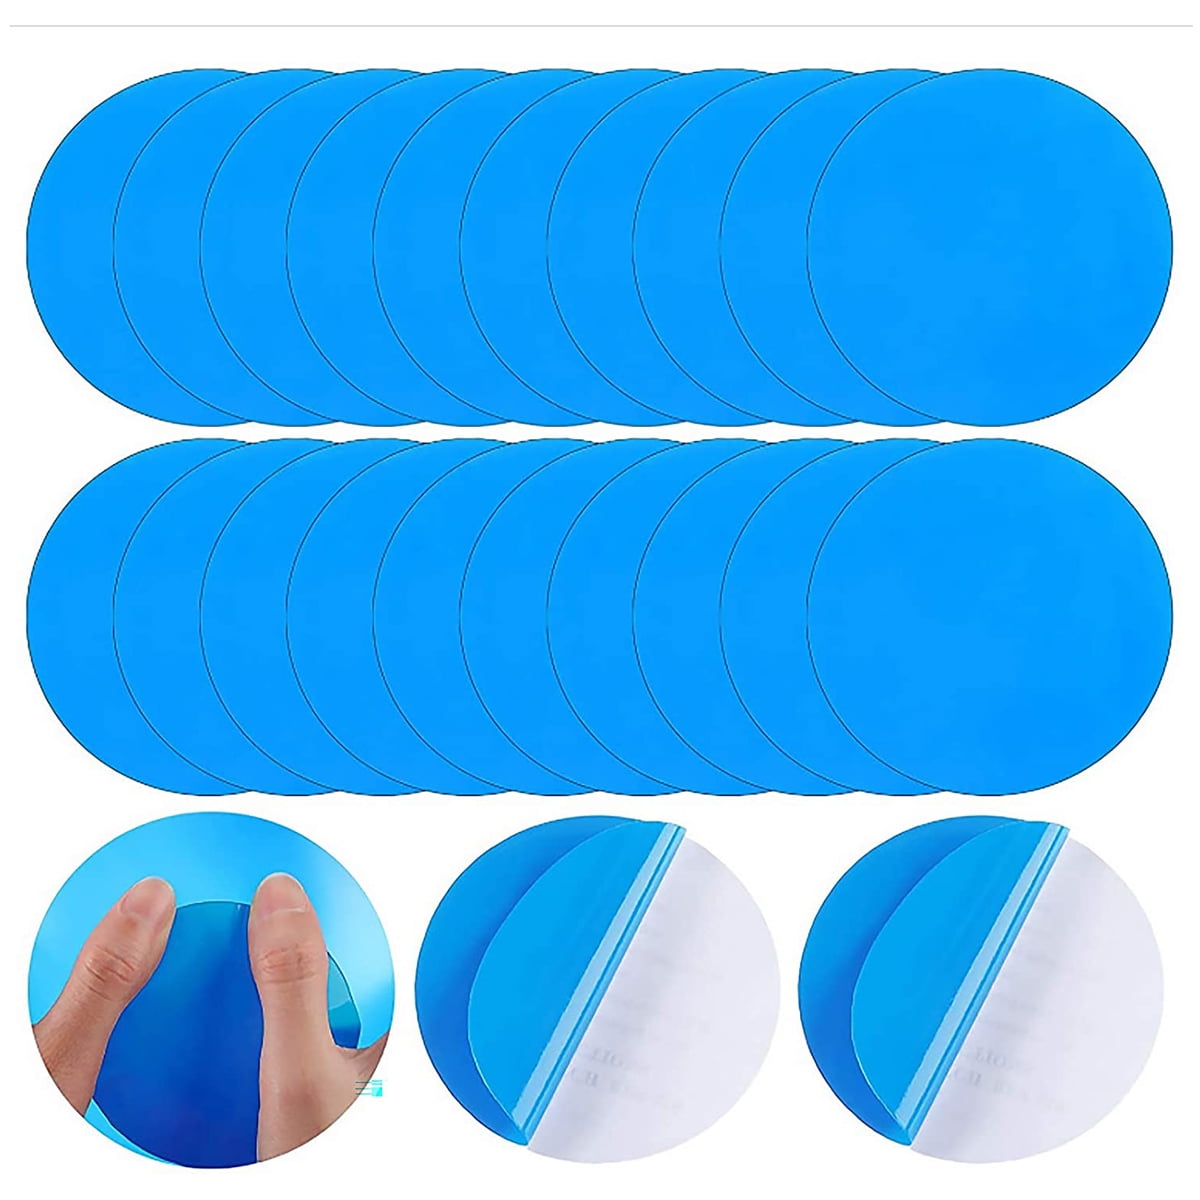 Inflatable Pillows Sleeping Bags Inflatable Sofas Water Balls Swimming 10 PC Self-Adhesive Repair Patches Pool,Waterproof Repair Patches for Repairing Inflatable Beds Etc. Inflatable Boats 